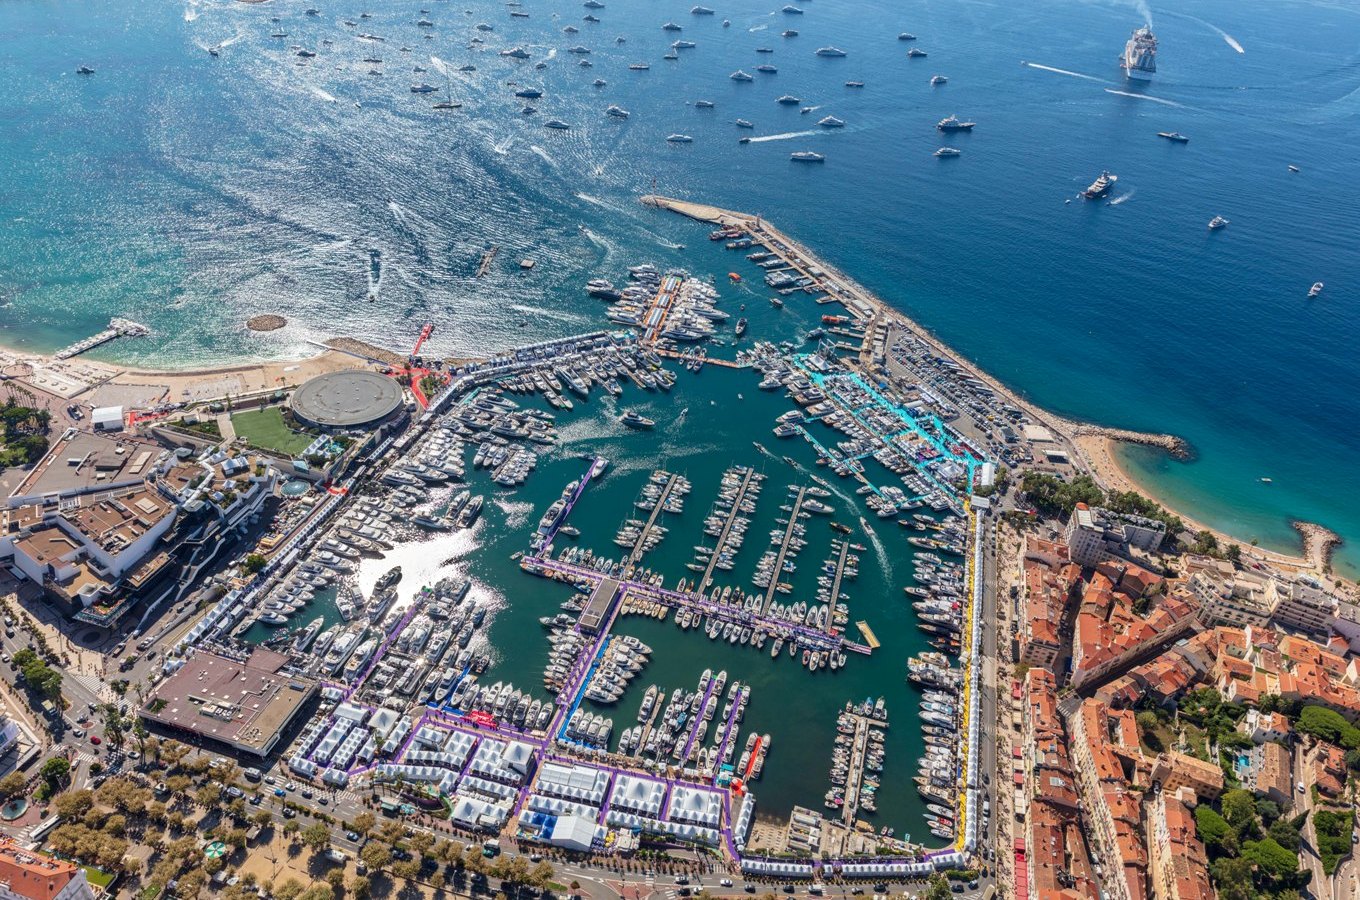 Yachts for Sale in Cannes South of France – Boat Sales